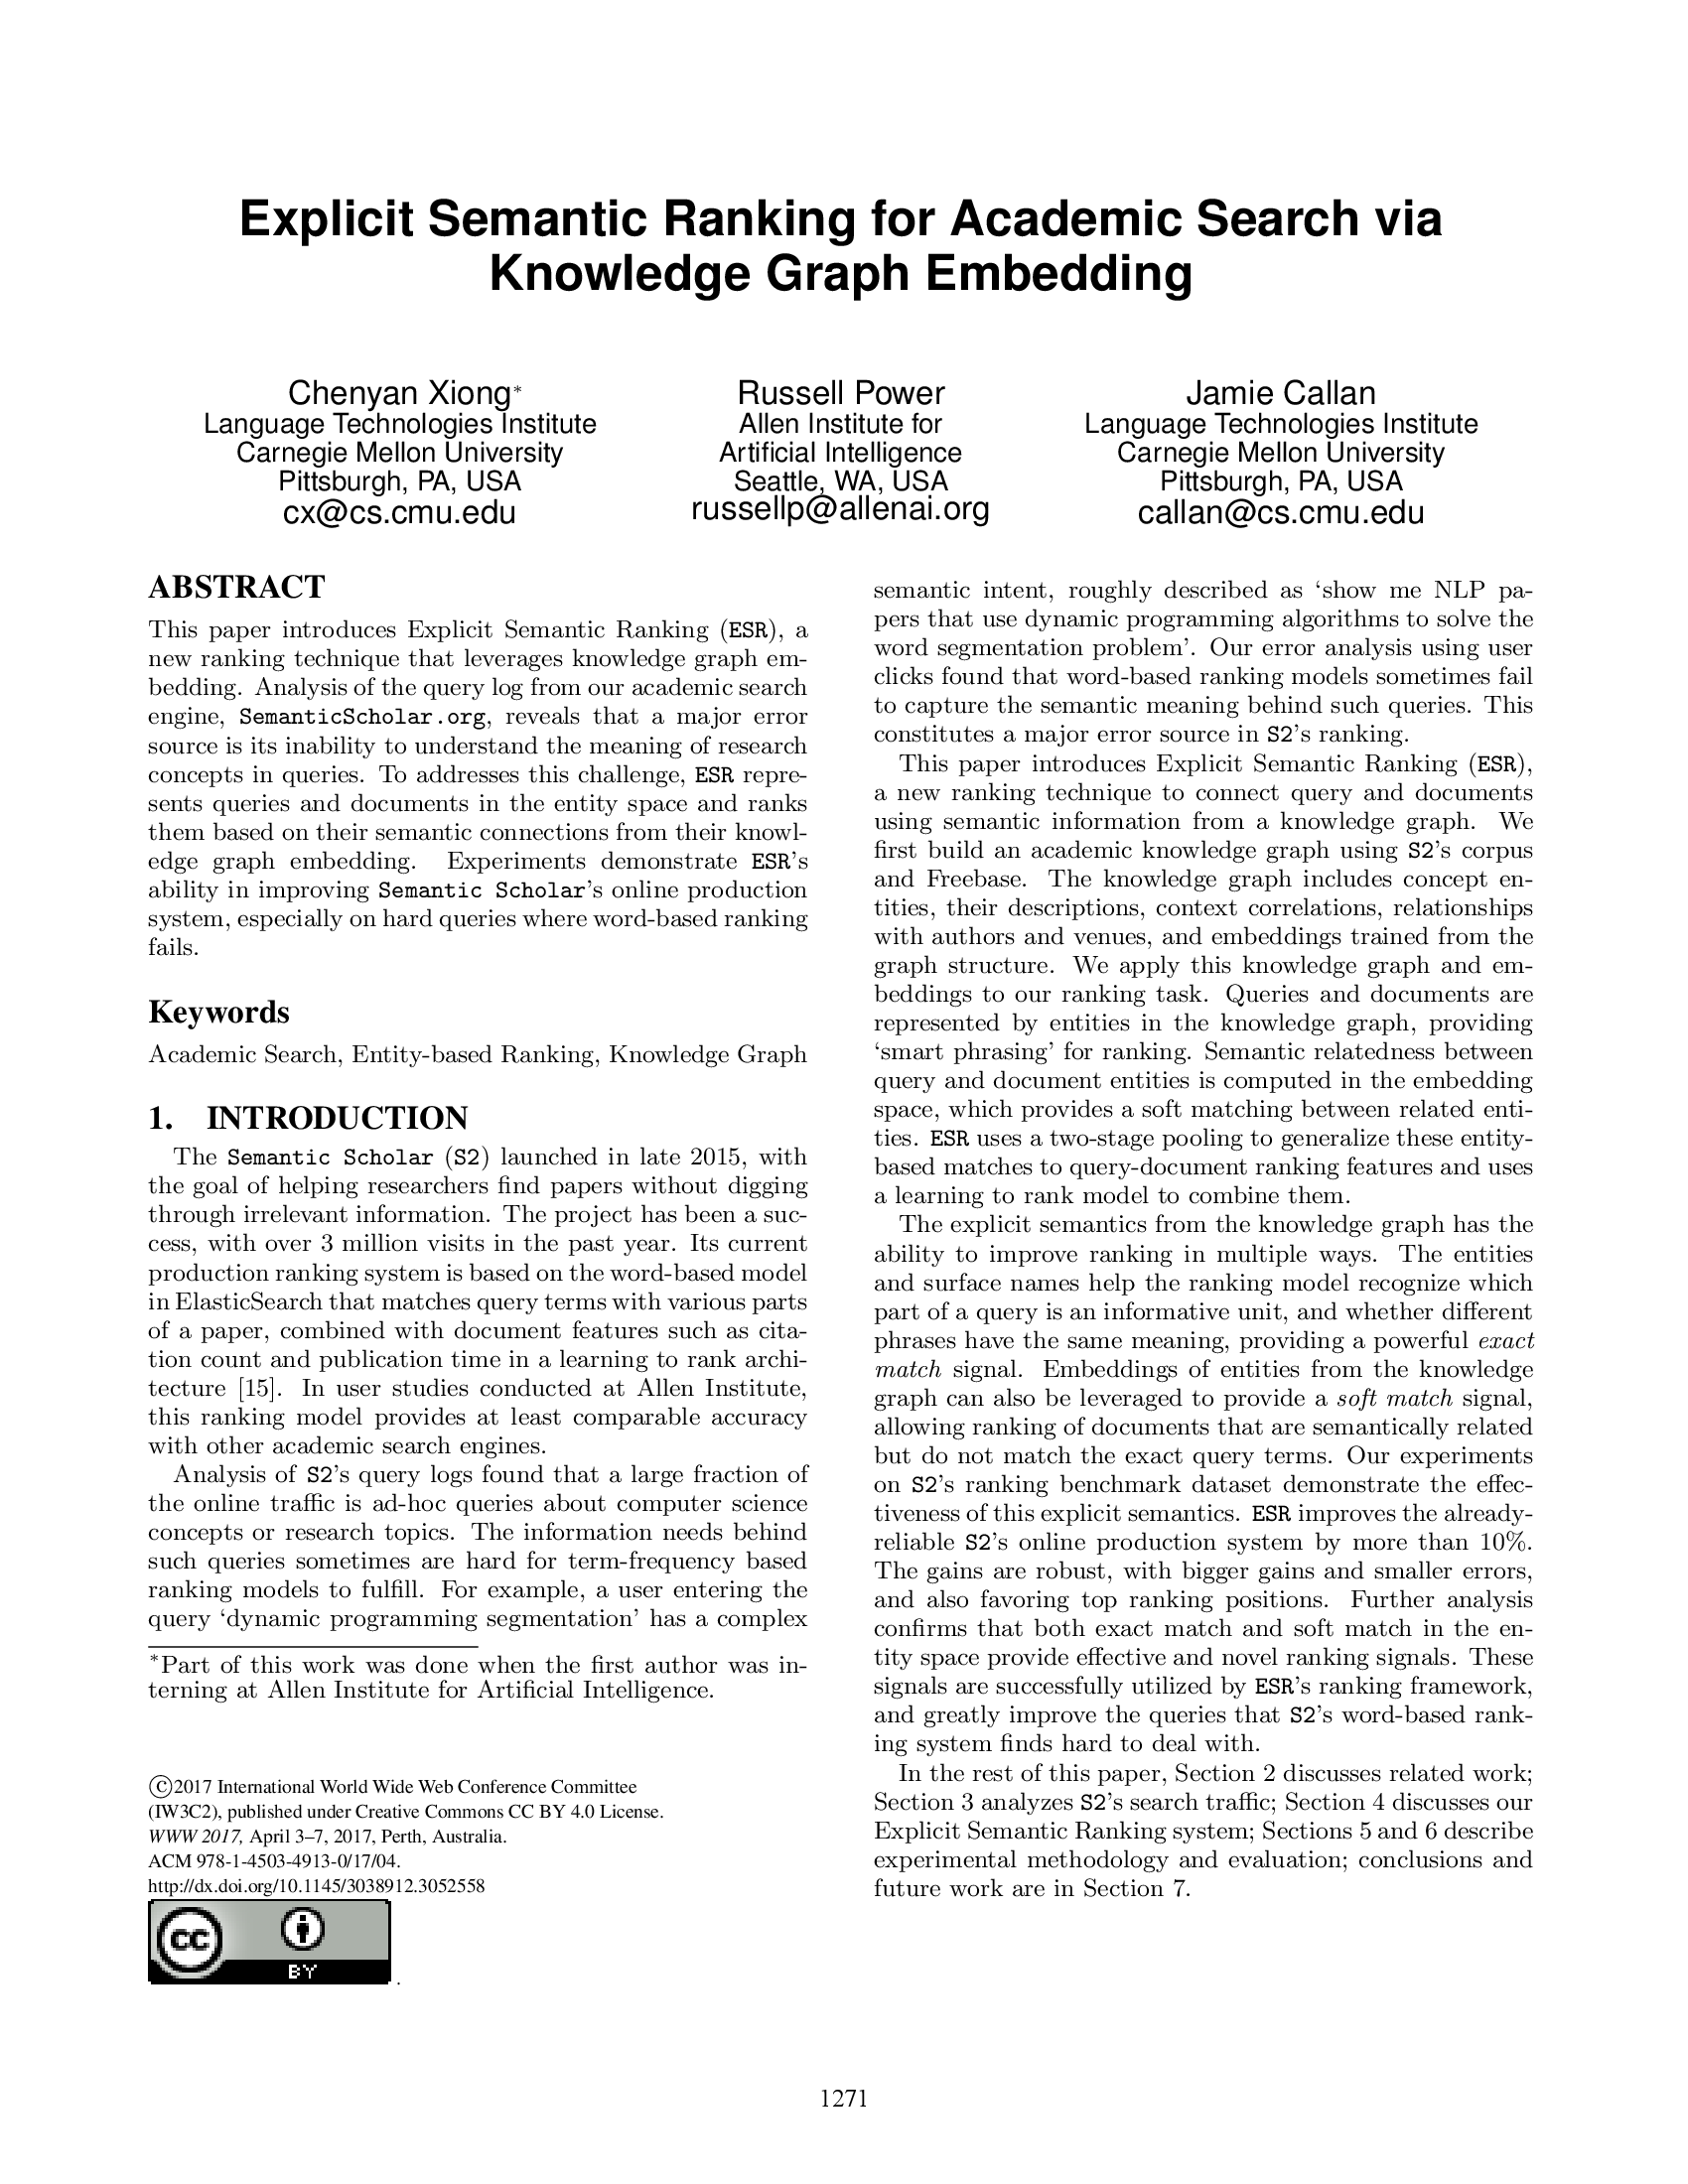 Explicit Semantic Ranking for Academic Search via Knowledge Graph Embedding